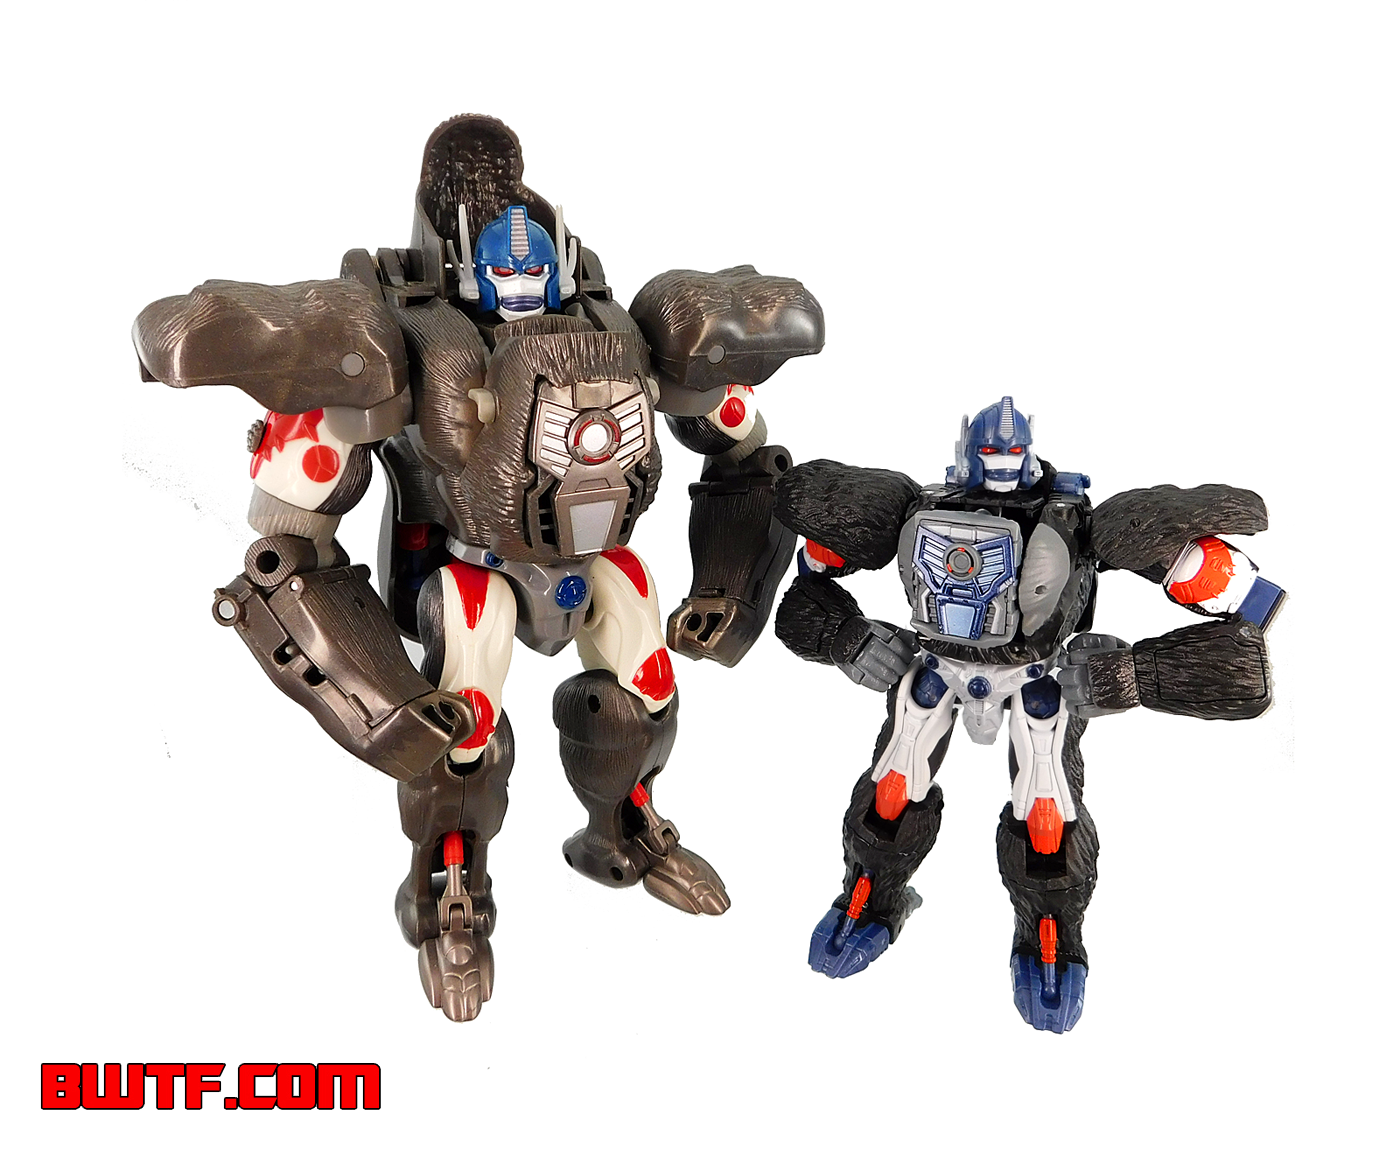 With 10th Anniversary Ultra Class Optimus Primal